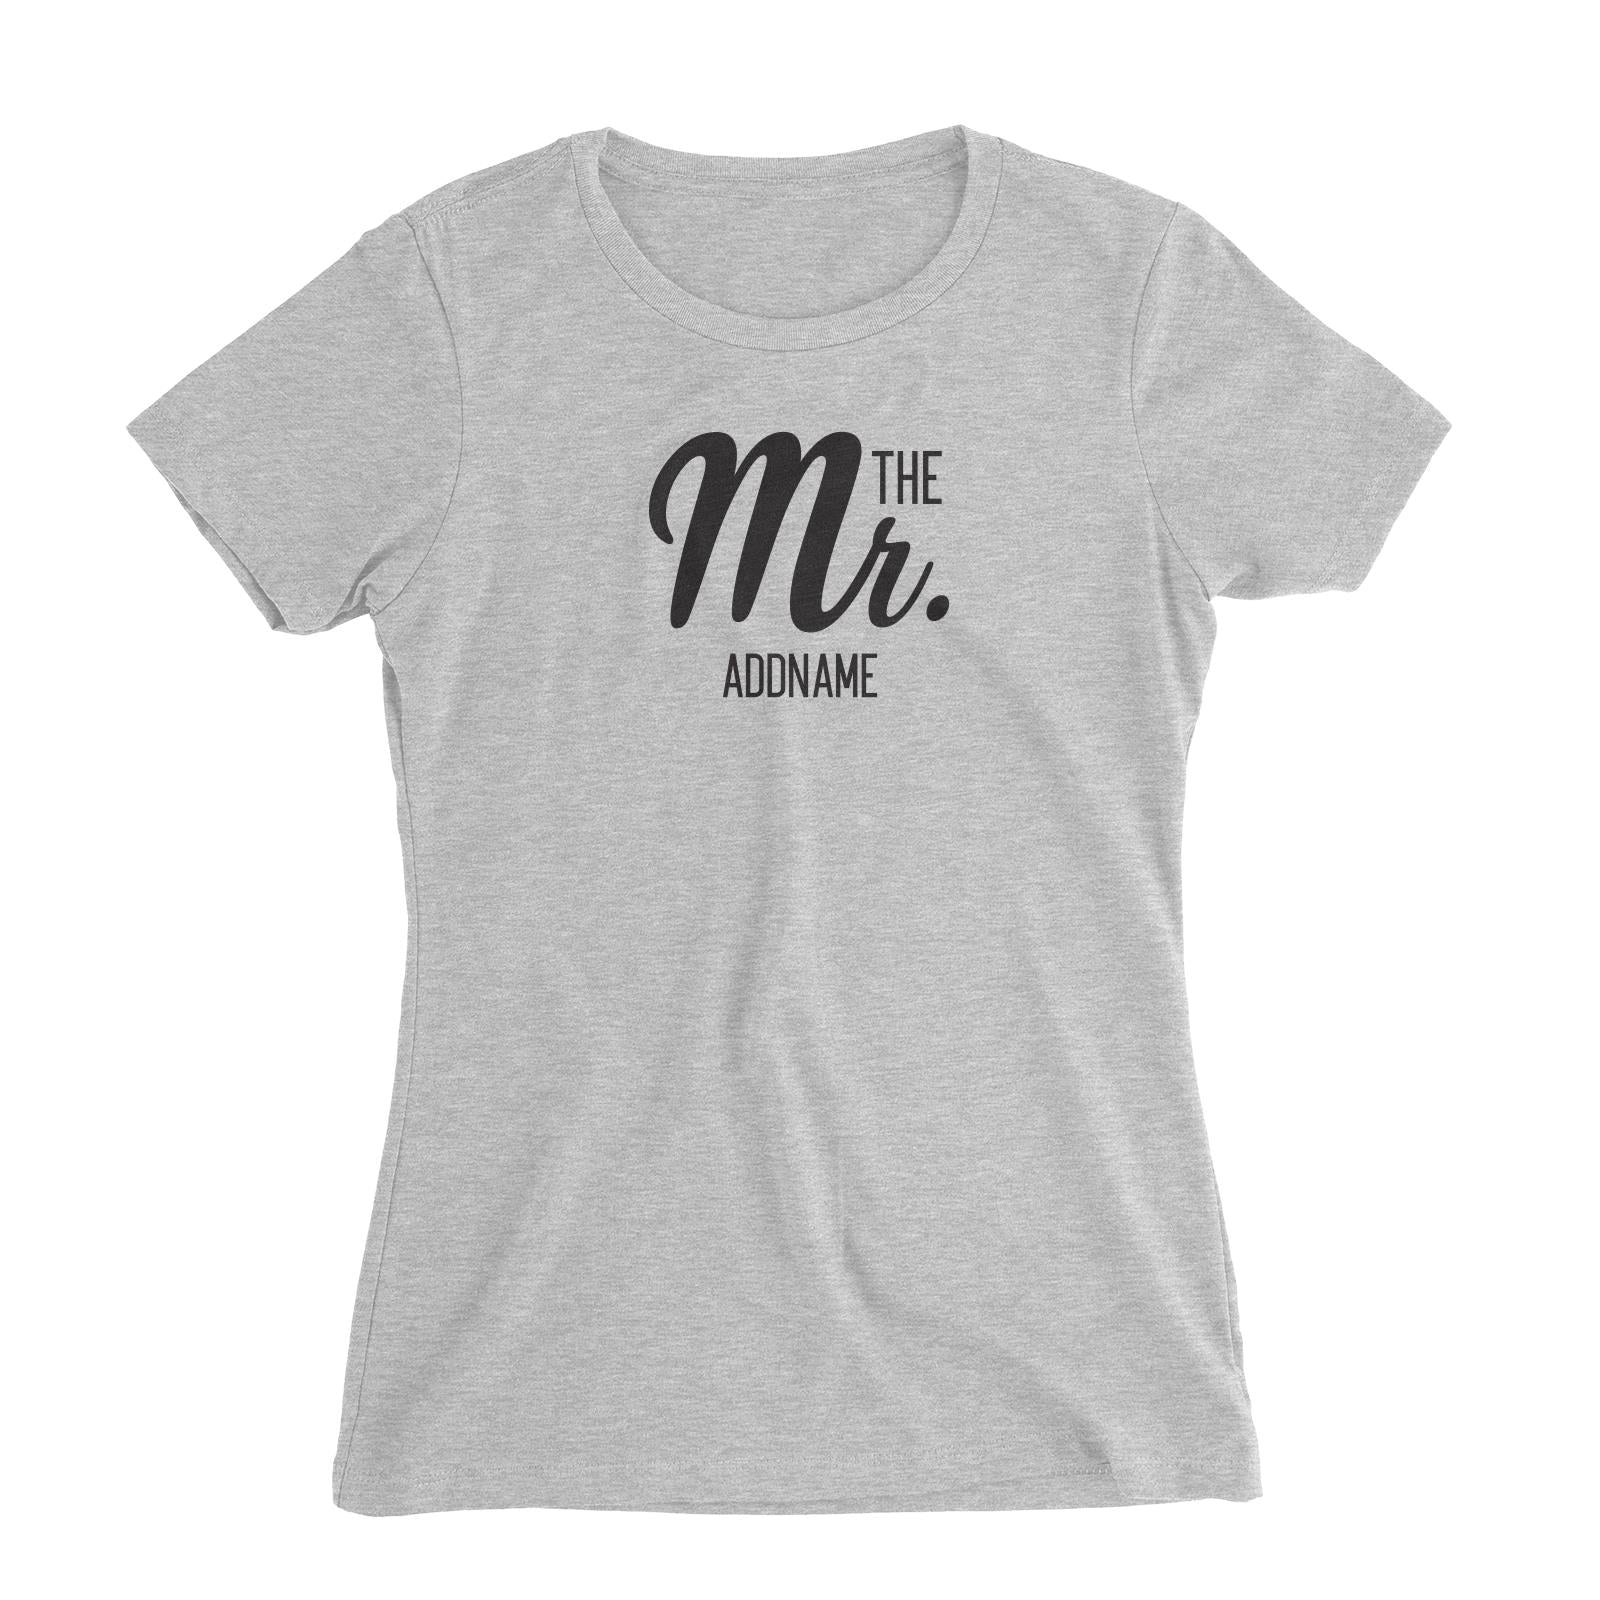 Husband and Wife The Mr. Addname Women Slim Fit T-Shirt